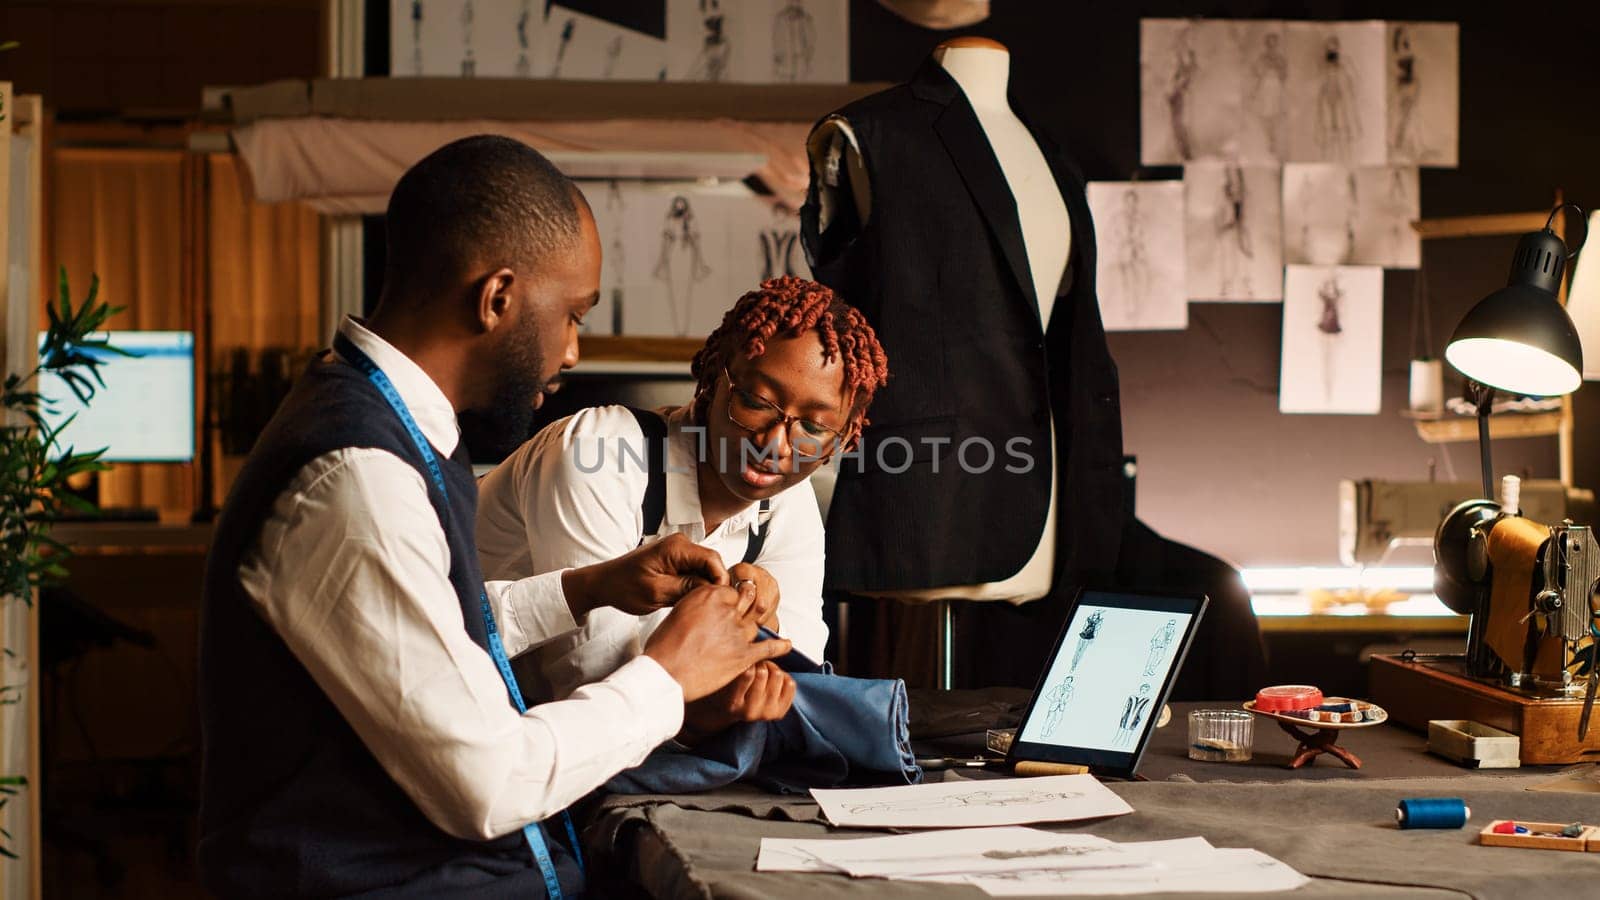 Two tailors choosing fabric for clothes in workshop, looking at materials on workstation before creating fashion collection. Team of couturiers crafting items with needlework.